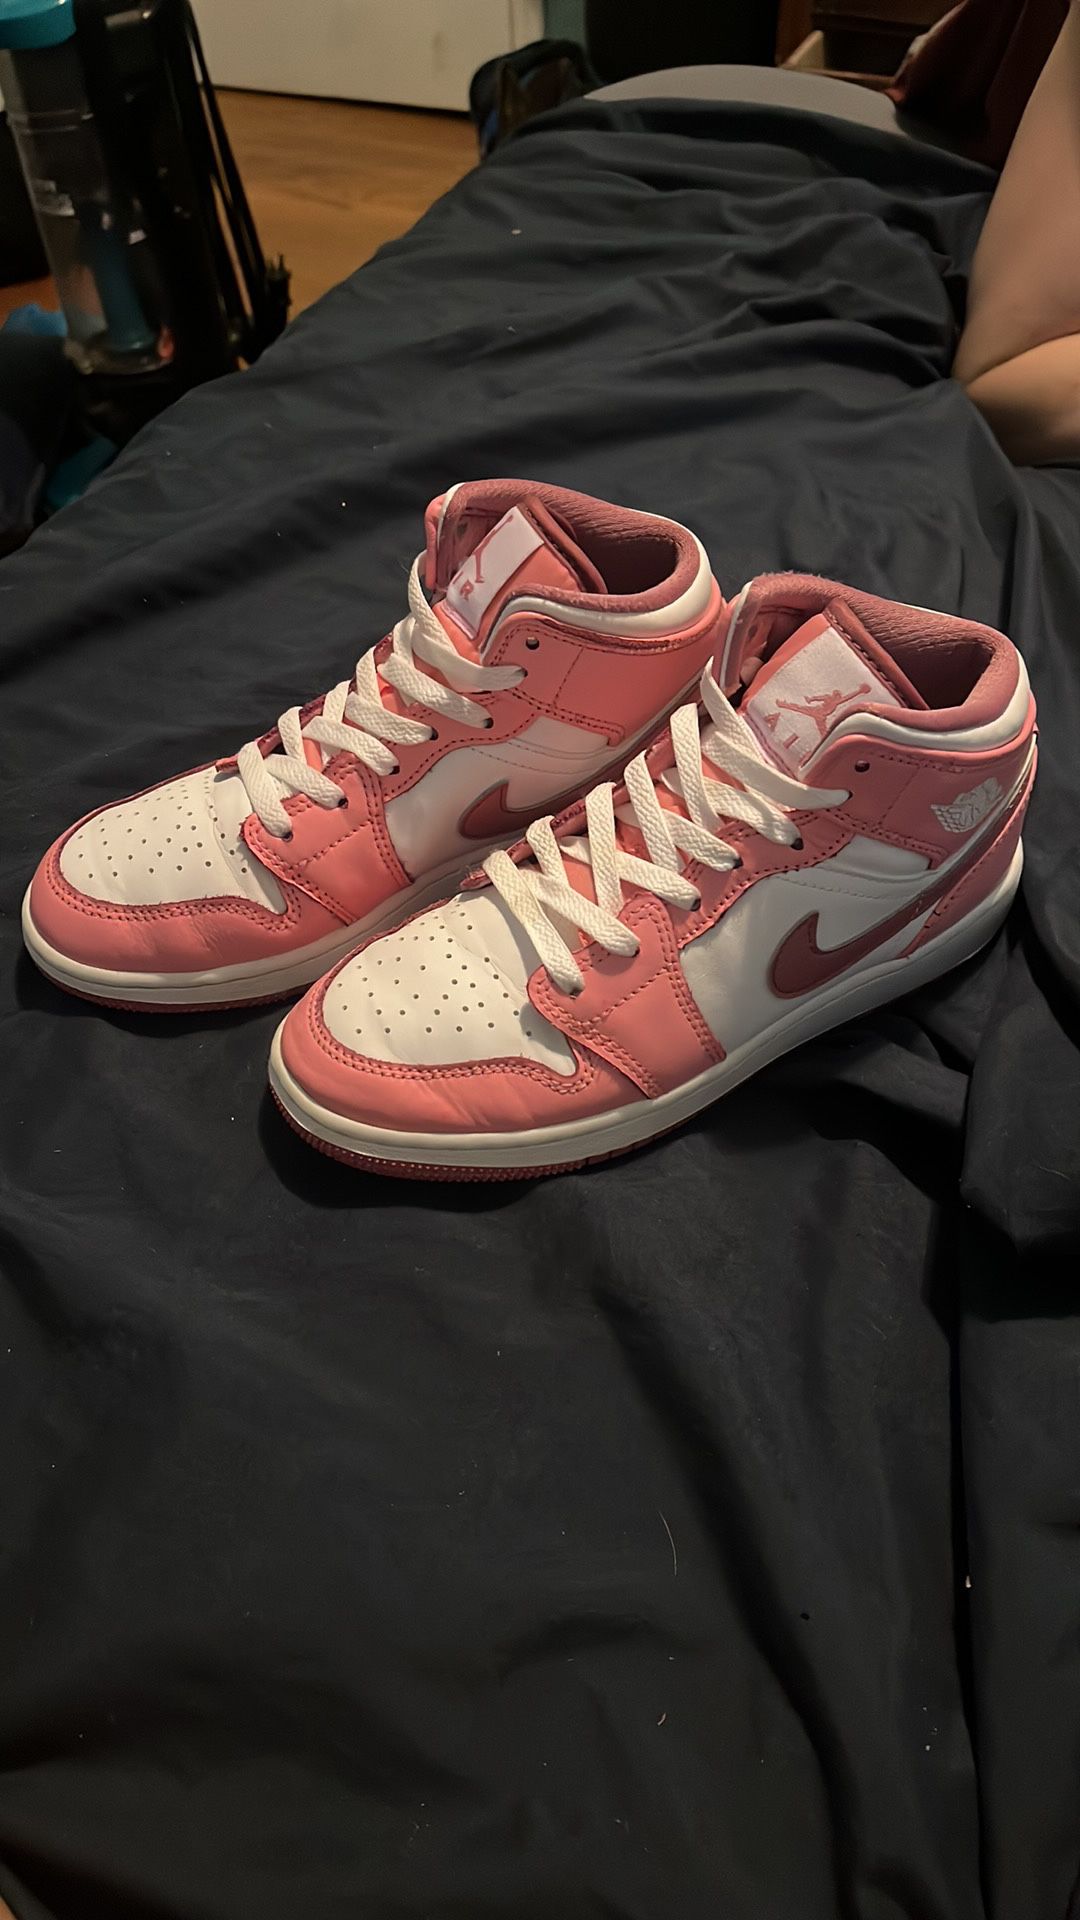 Nike Air Jordan 1 Valentines Shoes Size 4(youth)